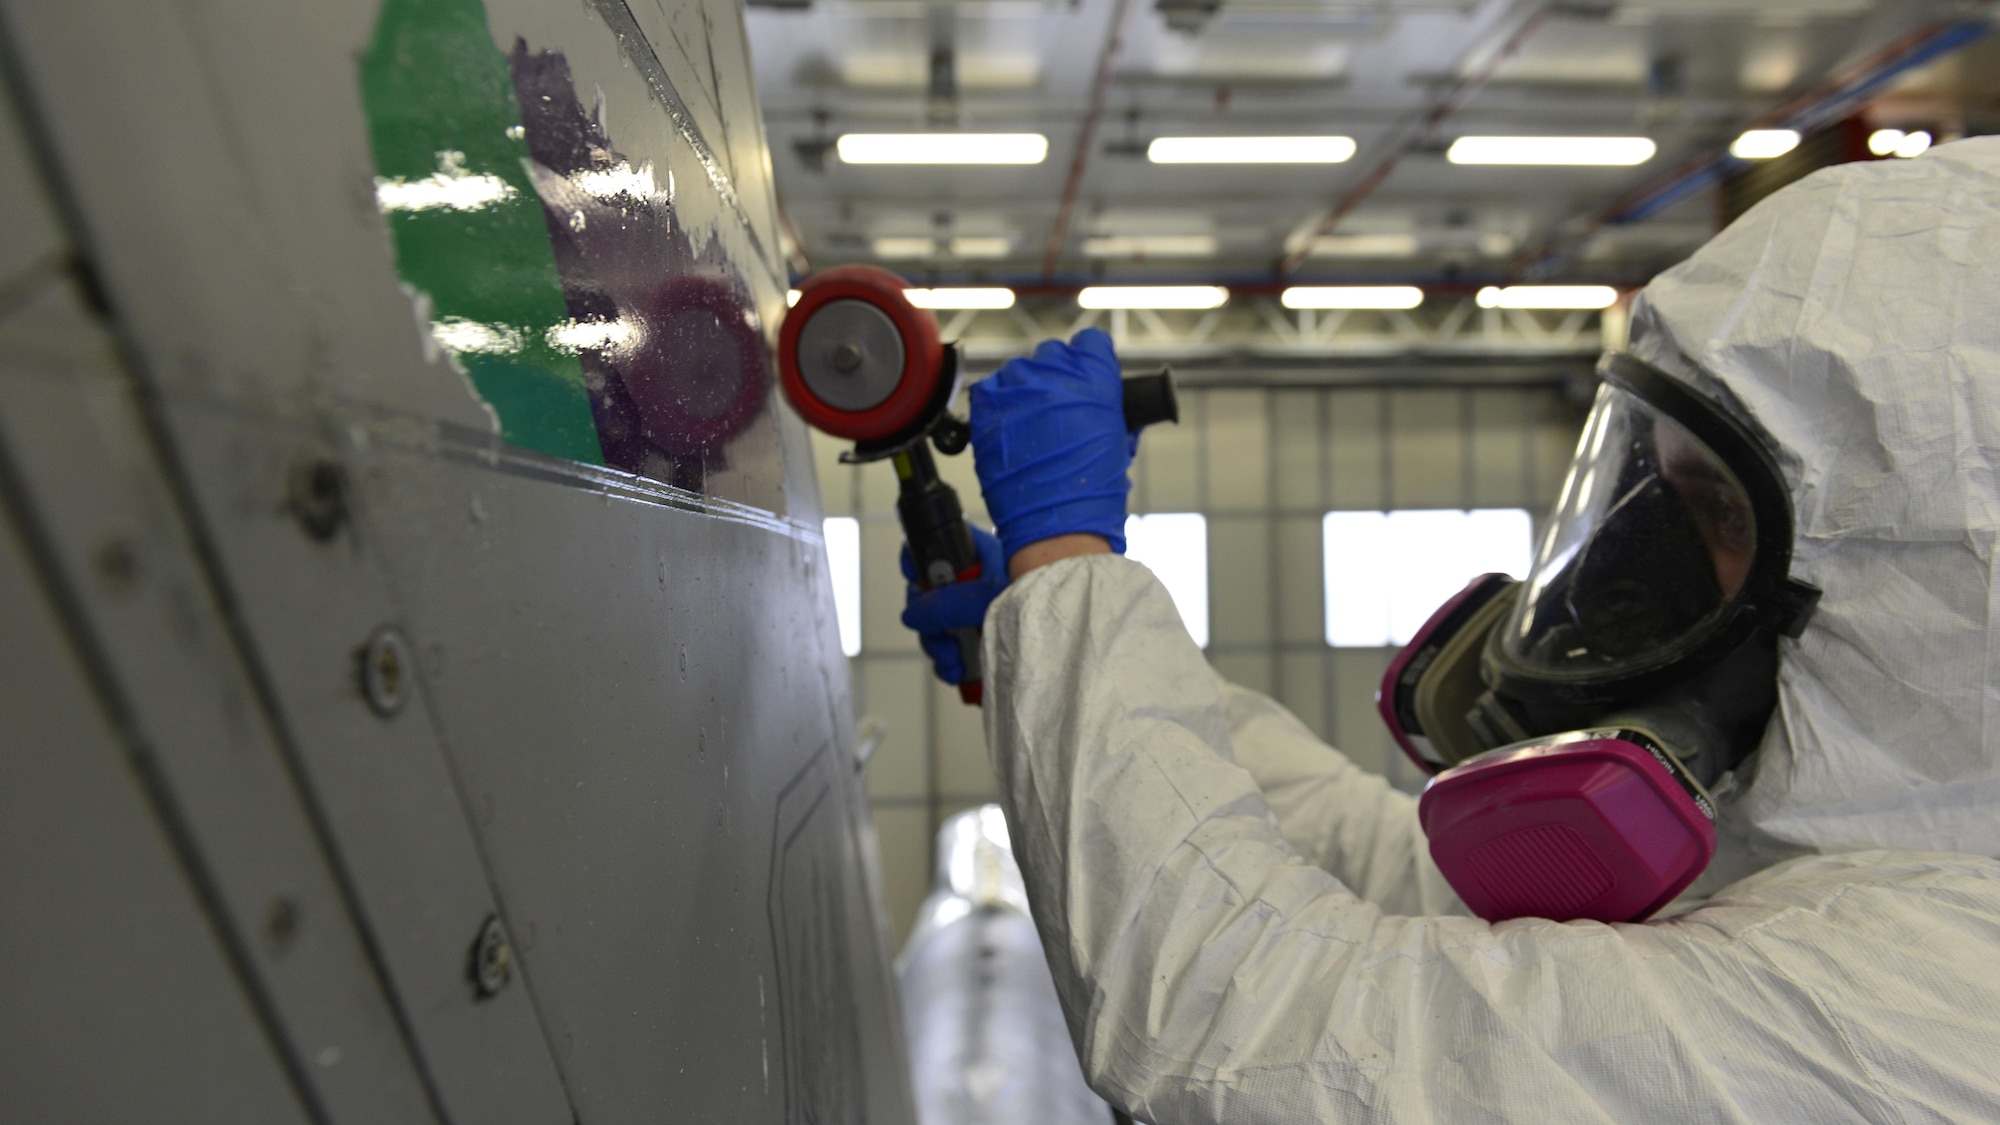 Senior Airman Adam Ciecalone, 31st Maintenance Squadron Aircraft Structural Maintenance journeyman, erases the tail strip from an F-16 Fighting Falcon at Aviano Air Base, Italy, Jan. 23, 2017. Pneumatic erasers are used to remove the tail strip paint. (U.S. Air Force photo by Senior Airman Cary Smith)